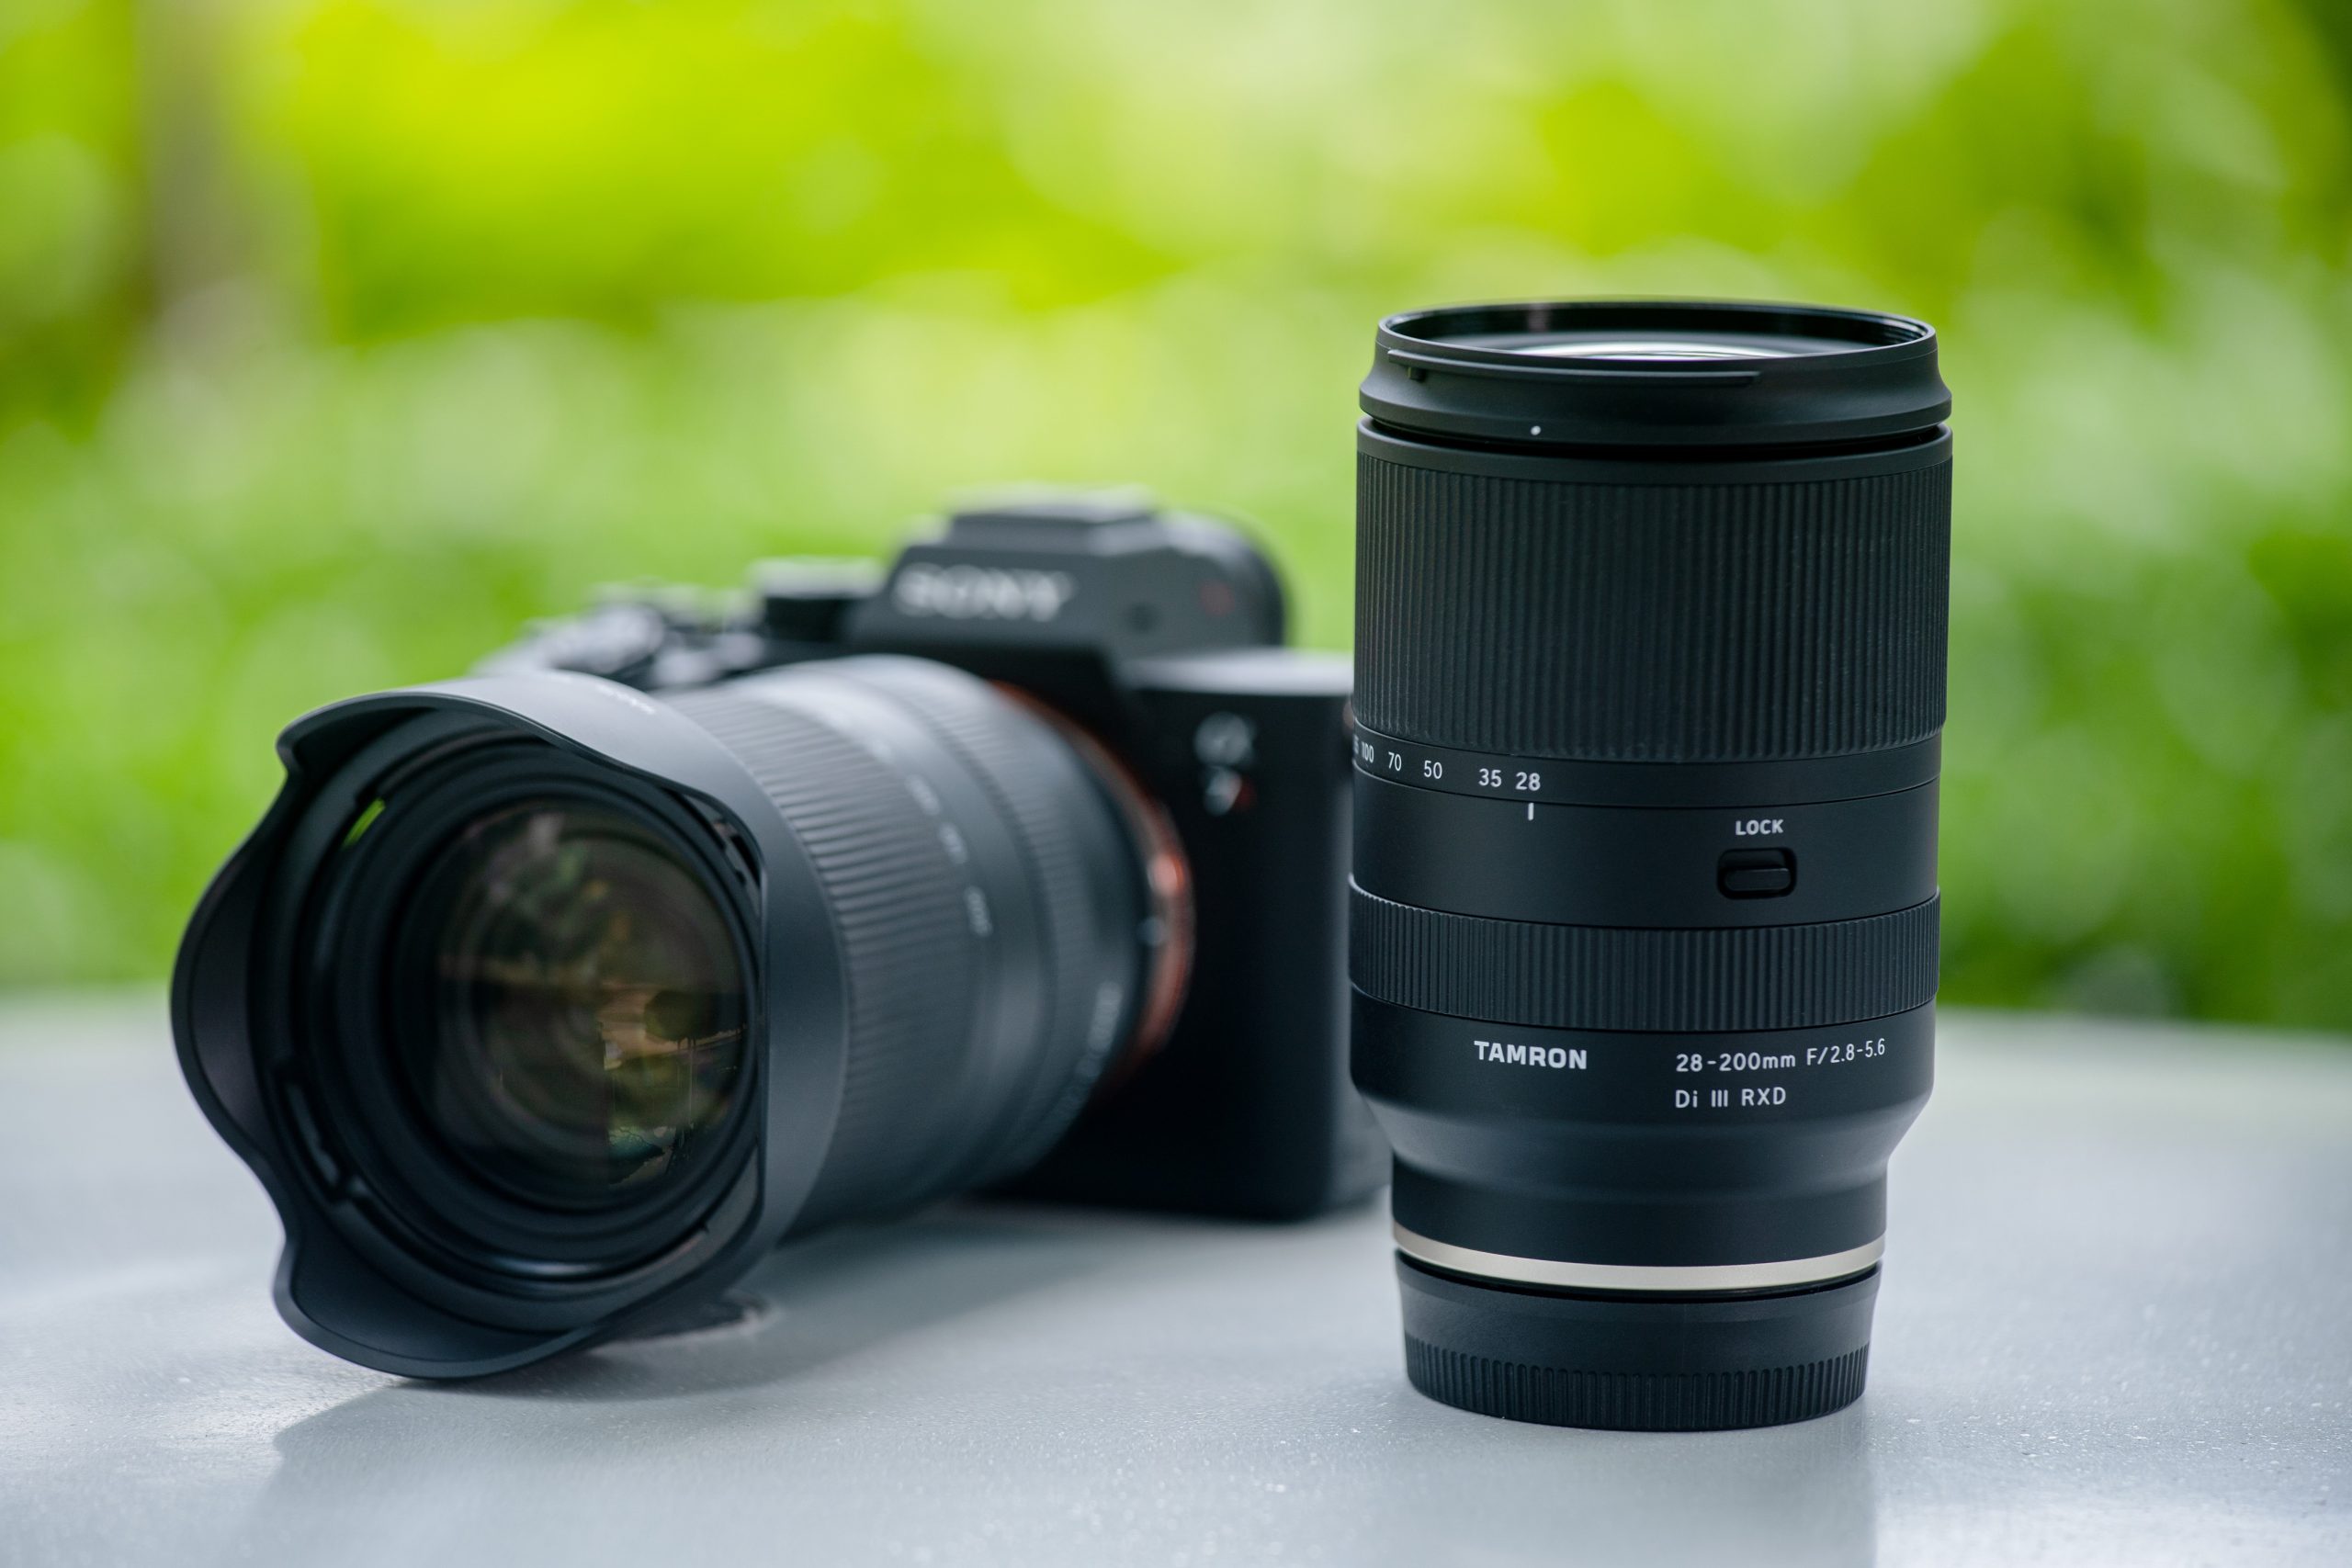 Tamron 28-200mm F2.8-5.6 Di III RXD Sony E Mount Lens - Plaza Cameras